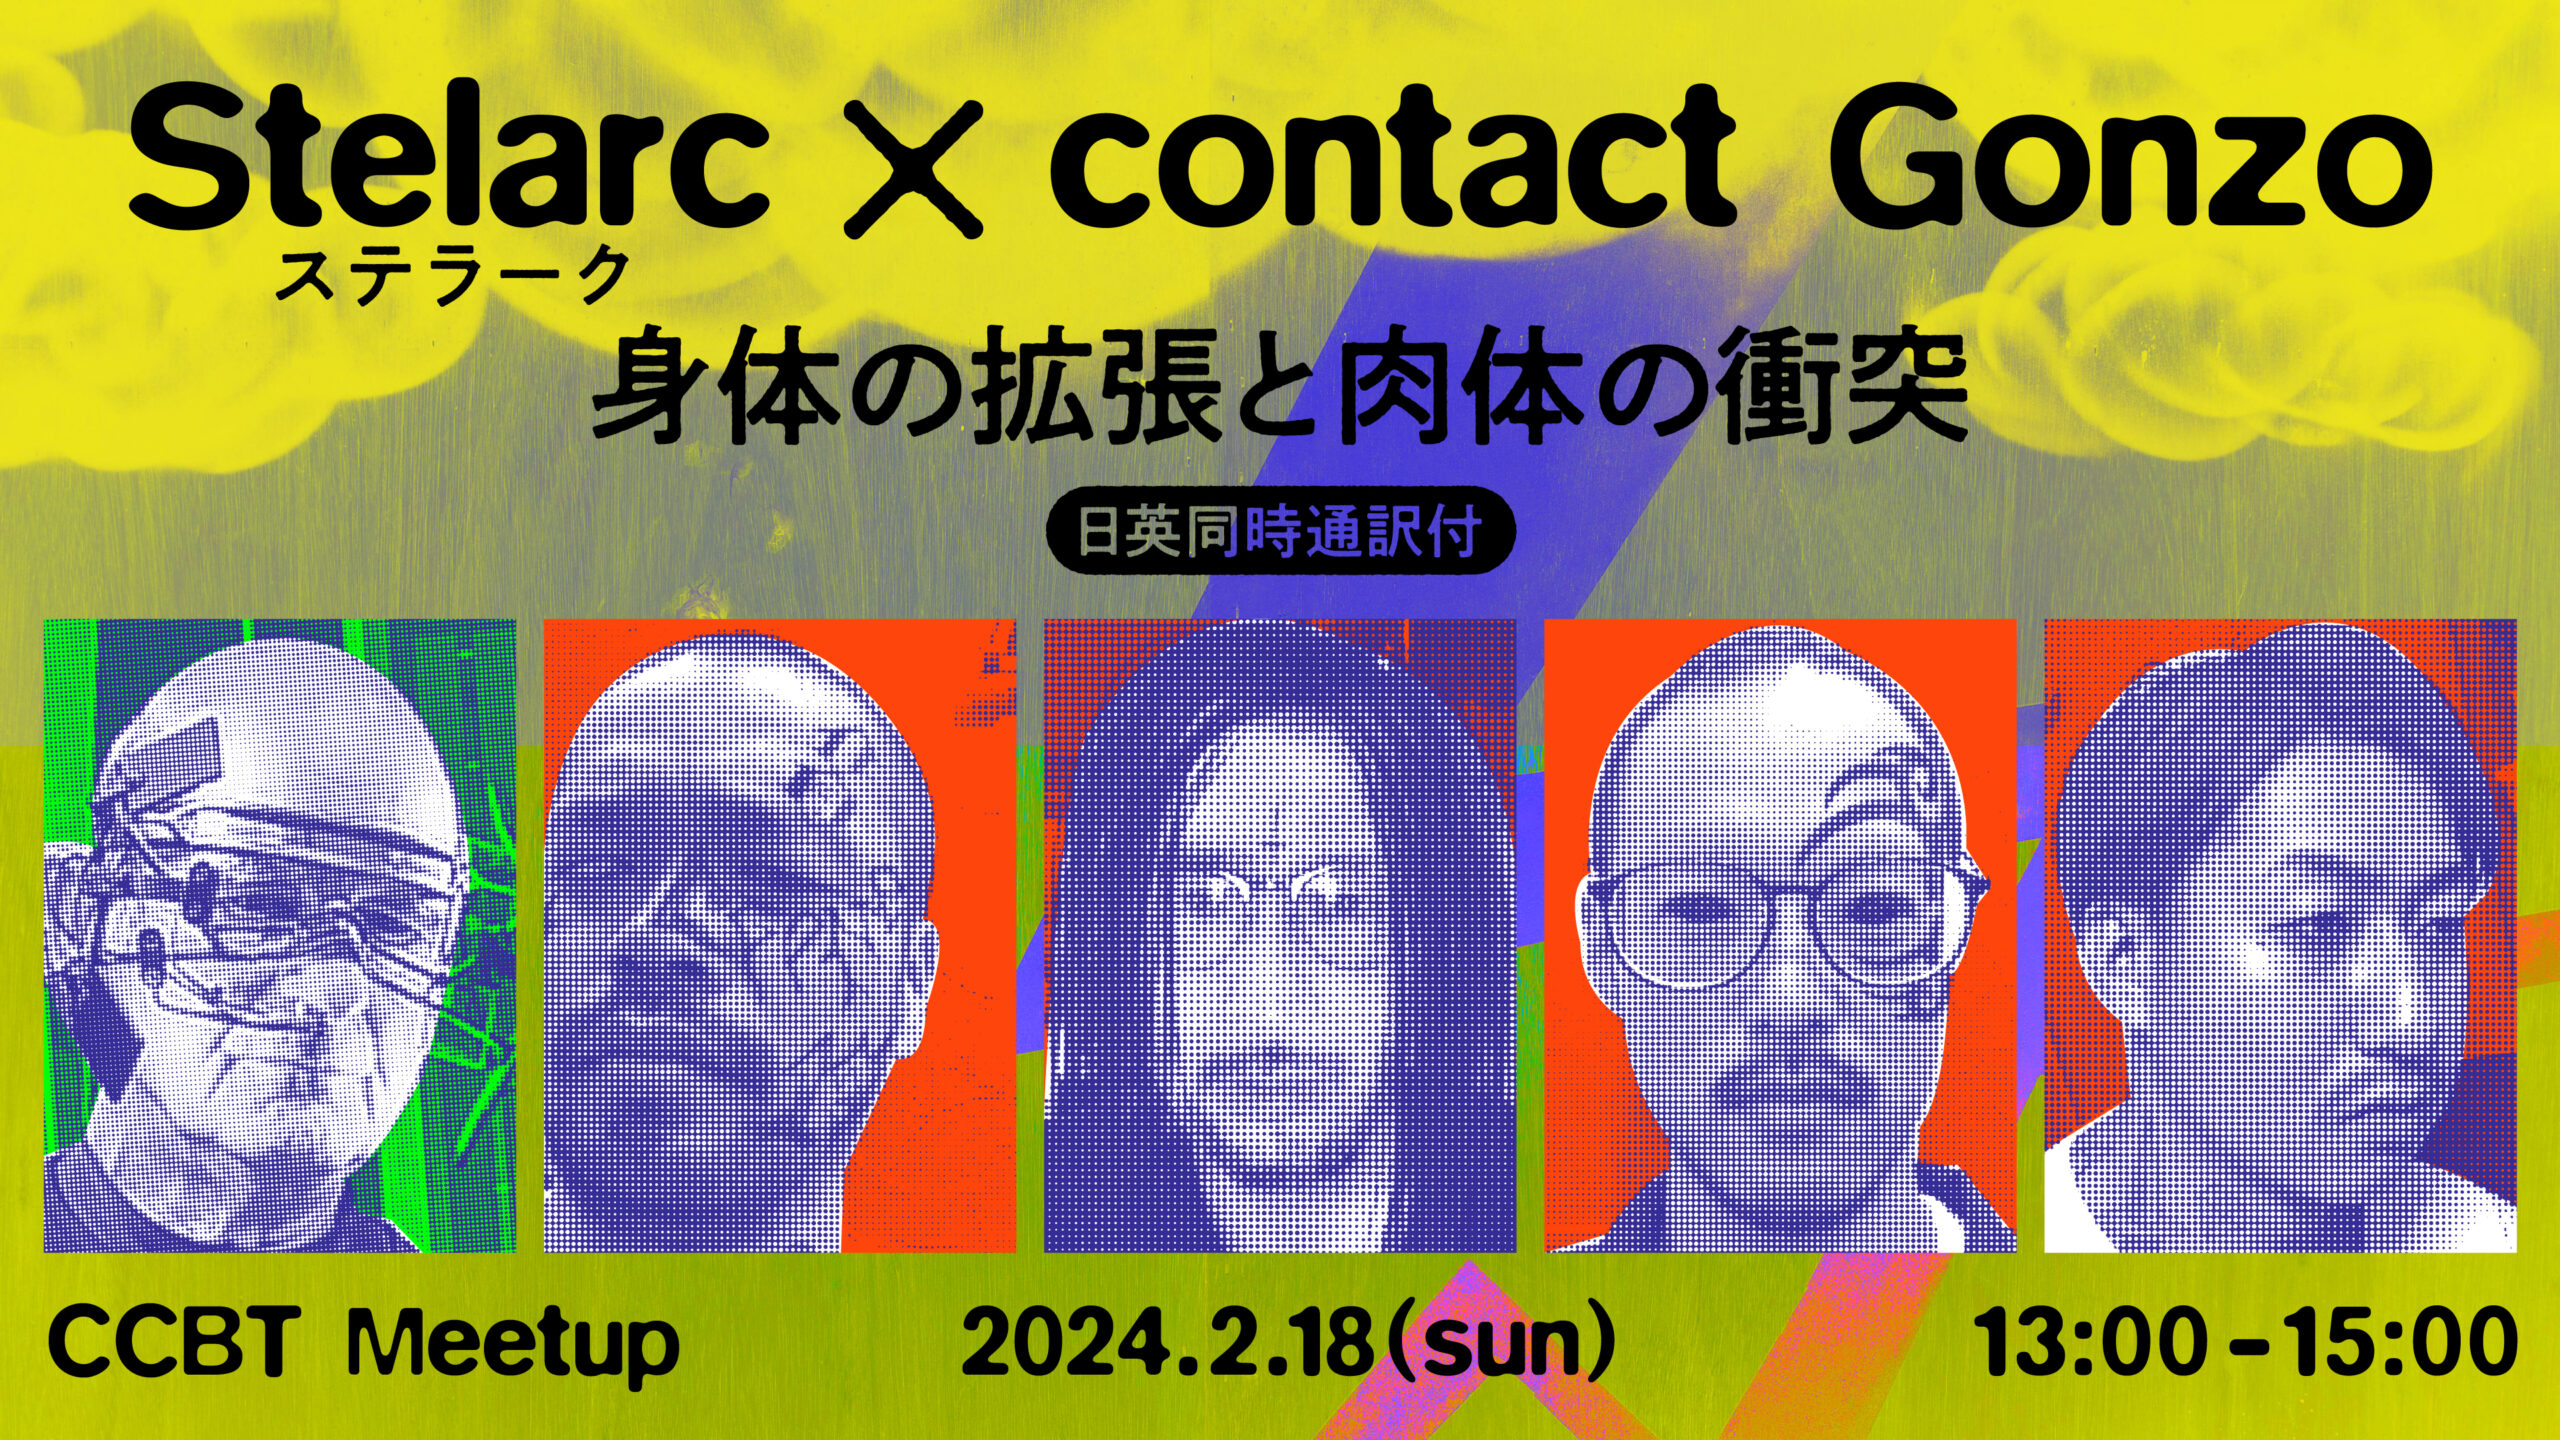 CCBT Meetup “Stelarc × contact Gonzo: Extended Bodies and Physical Collision”